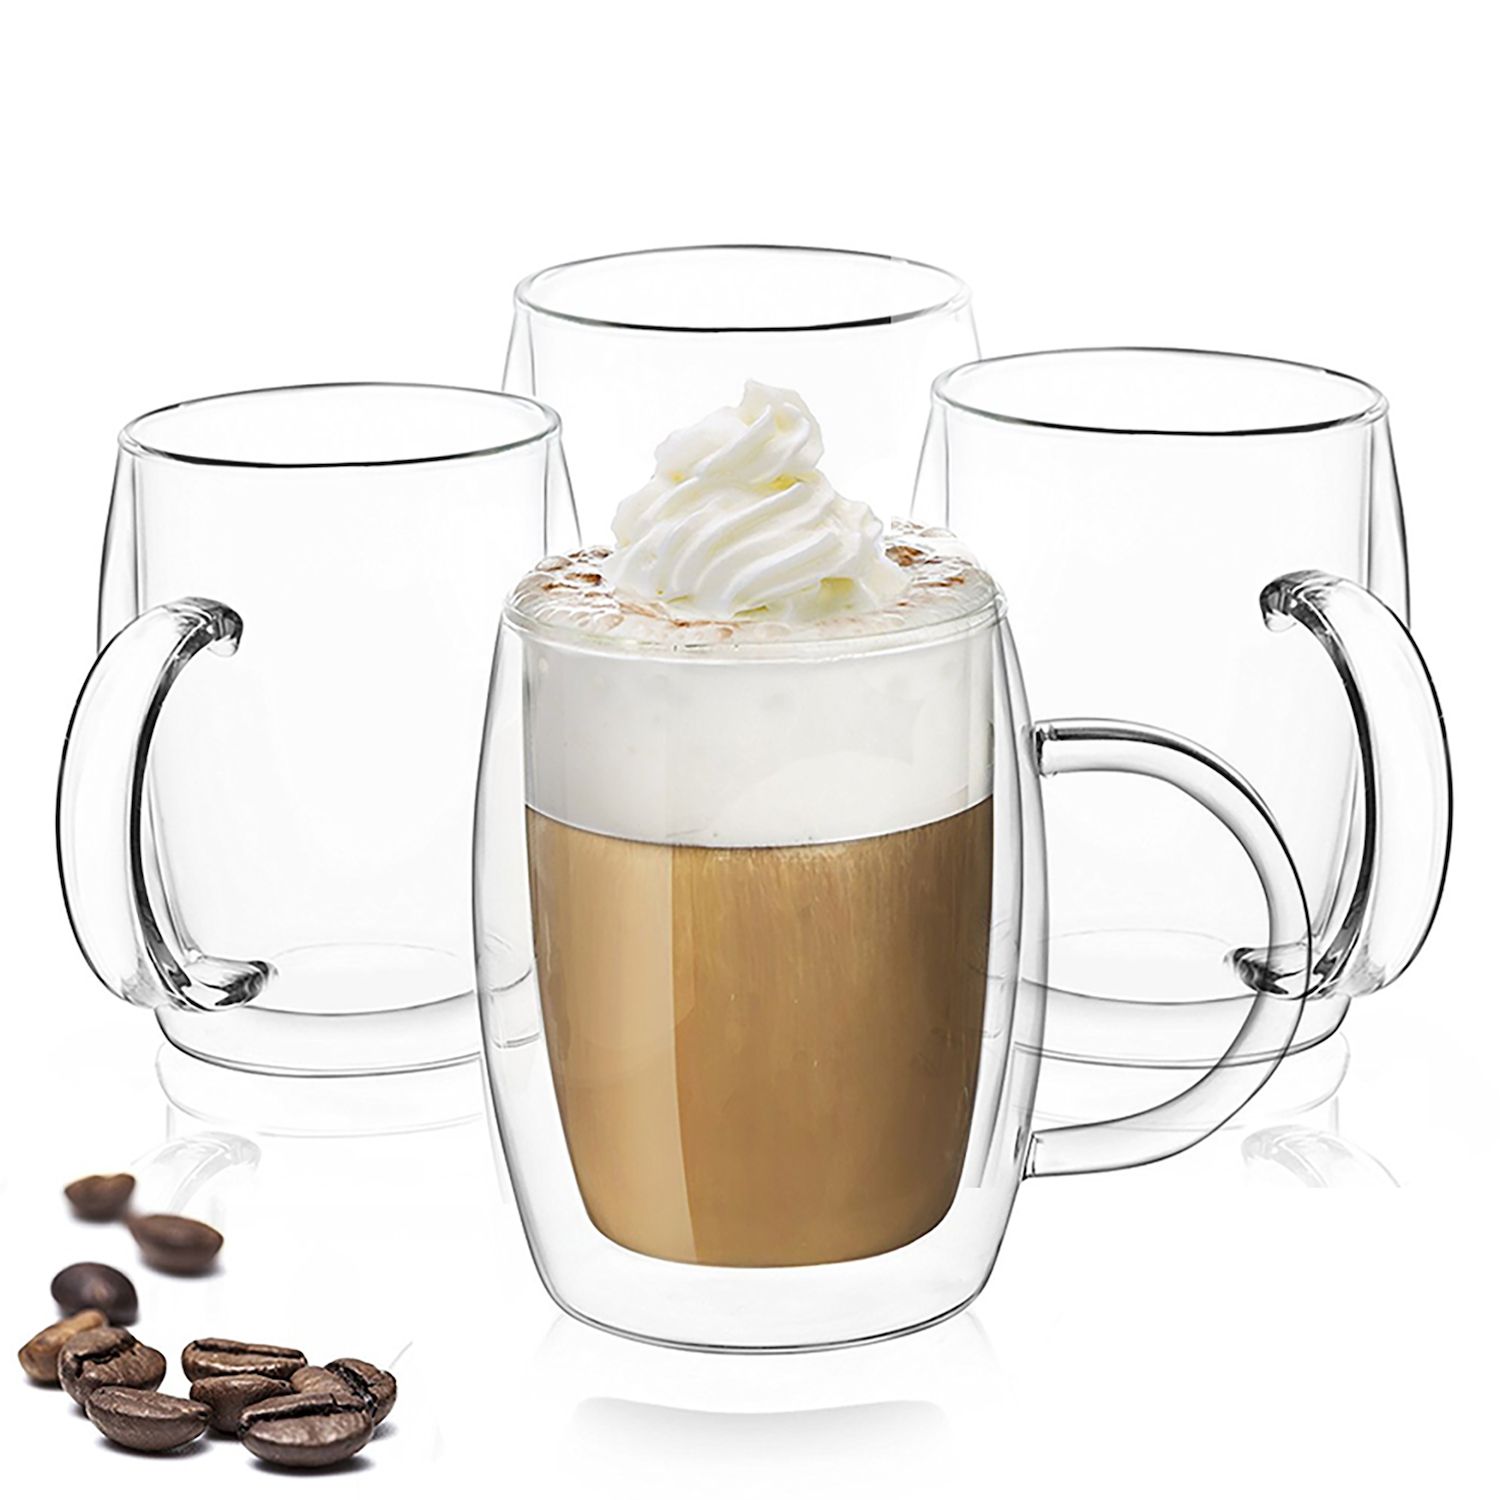 JoyJolt Caleo Collection Glass Coffee Cups Double Wall Insulated Mugs Set of 2